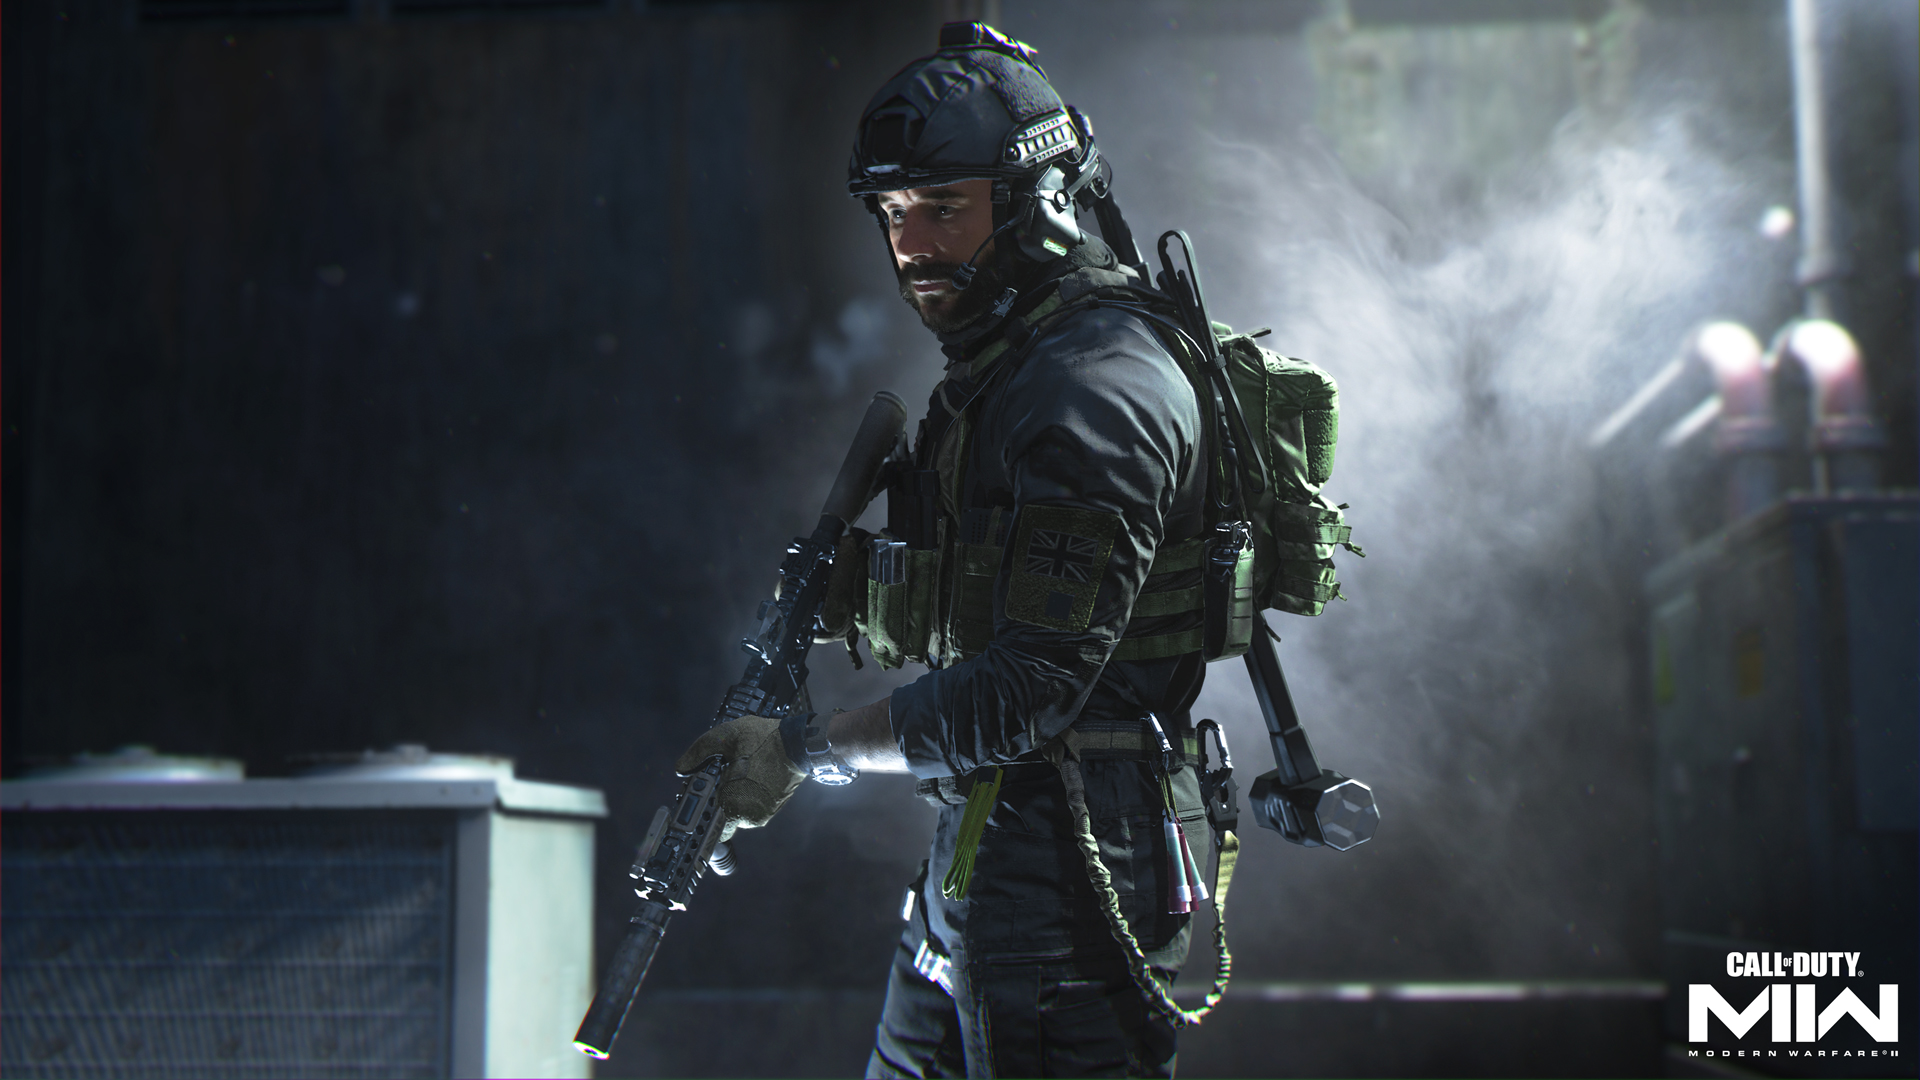 Announcement: Digitally preorder Call of Duty®: Modern Warfare® II to play the full Campaign up to a week before launch starting October 2022